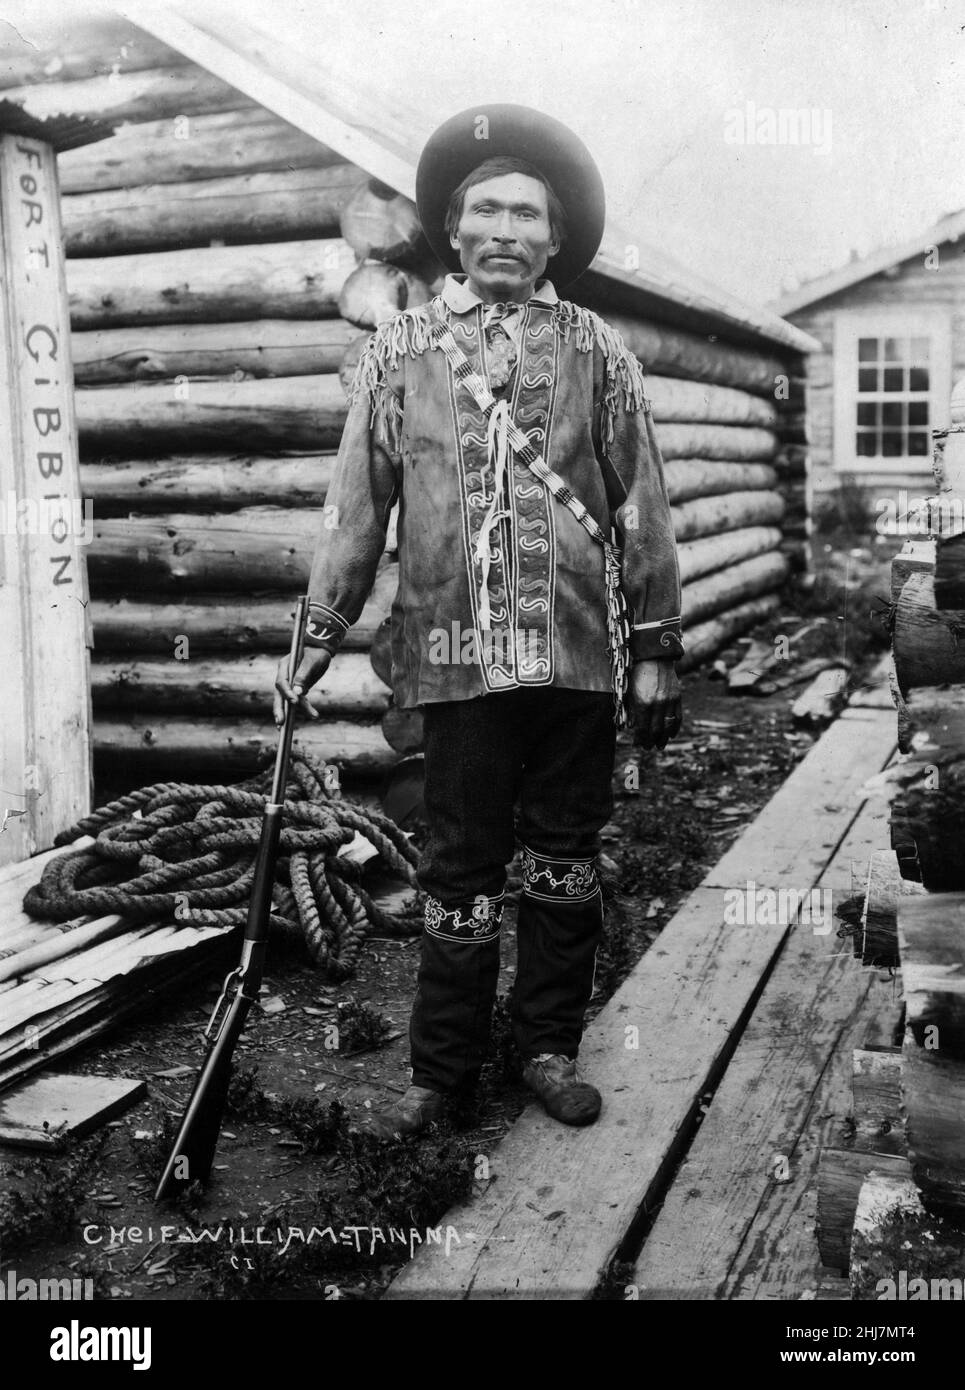 Antique and vintage photo - Native american / Indian / American Indian. Chief William, Tanana. 1916. Stock Photo